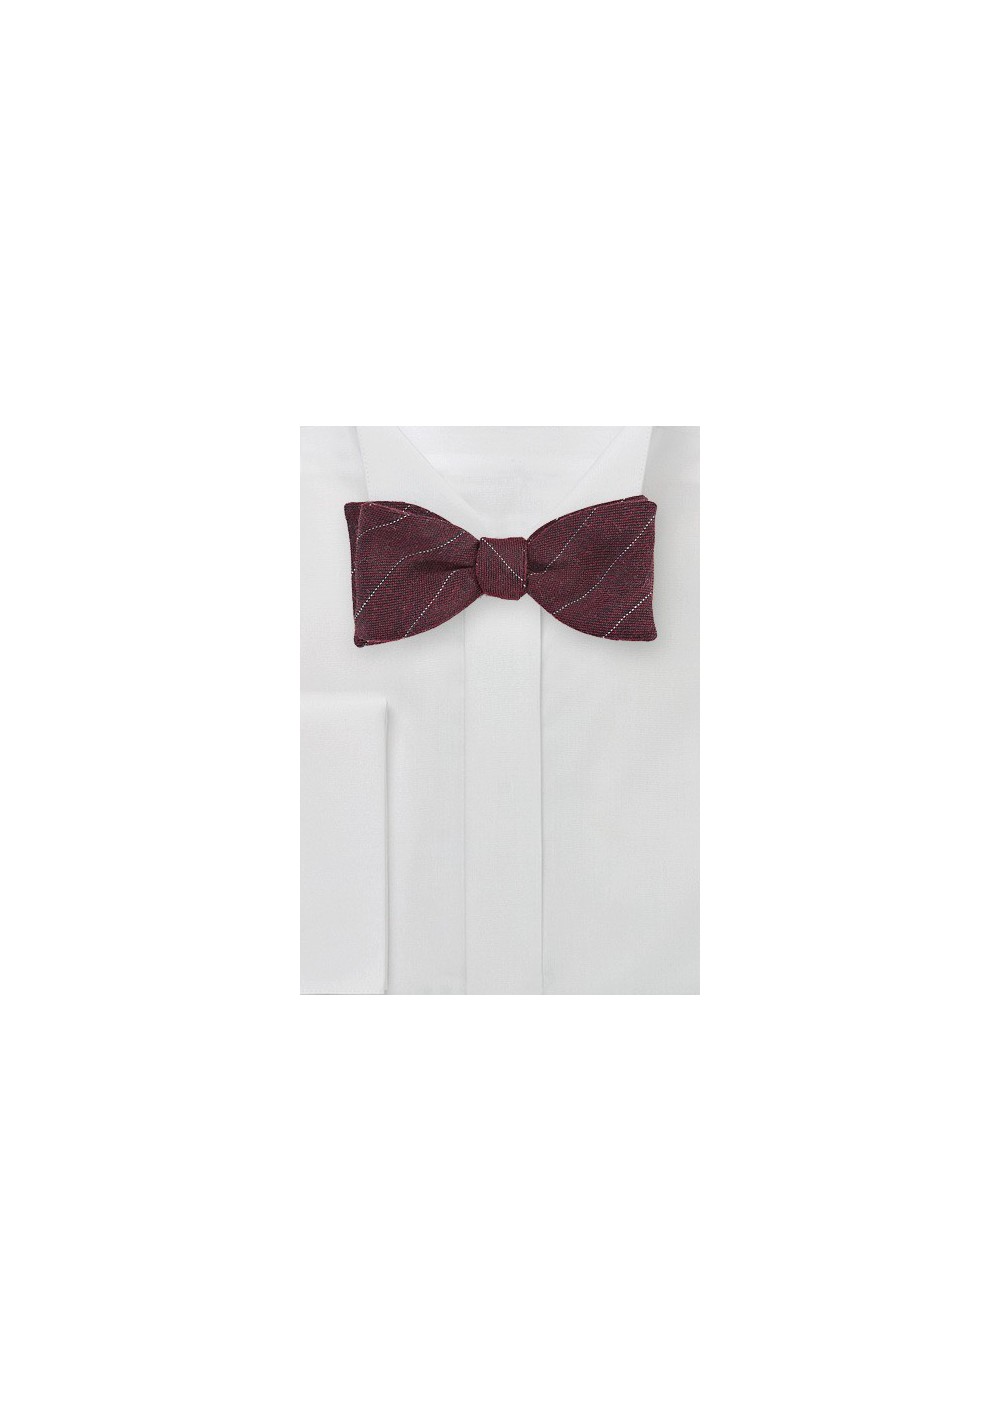 Deep Red Wool Bow Tie with Pencil Stripes